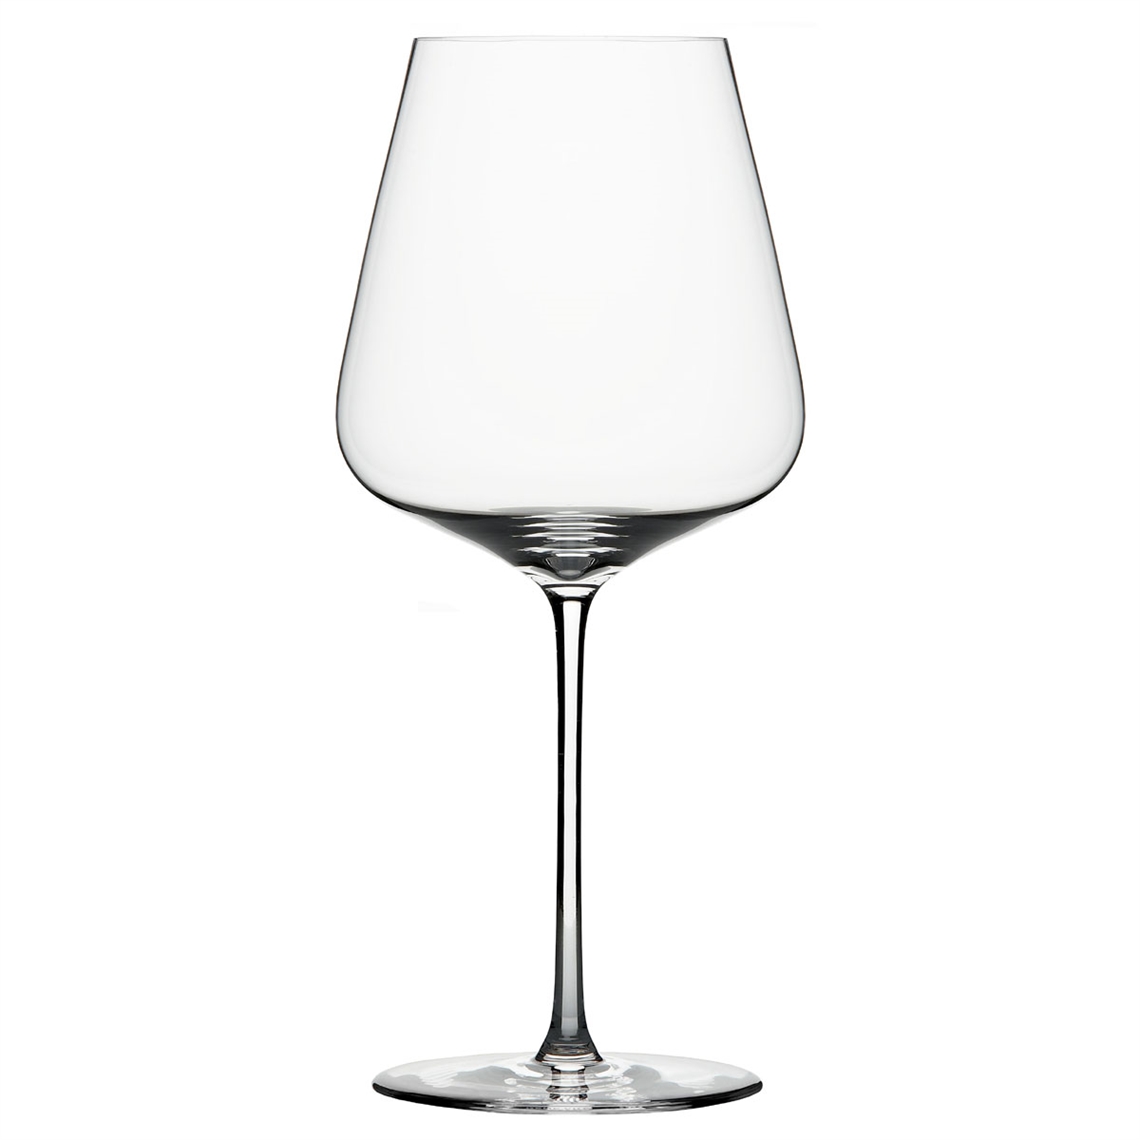 View more which riedel wine glass to choose from our Premium Mouth Blown Glassware range